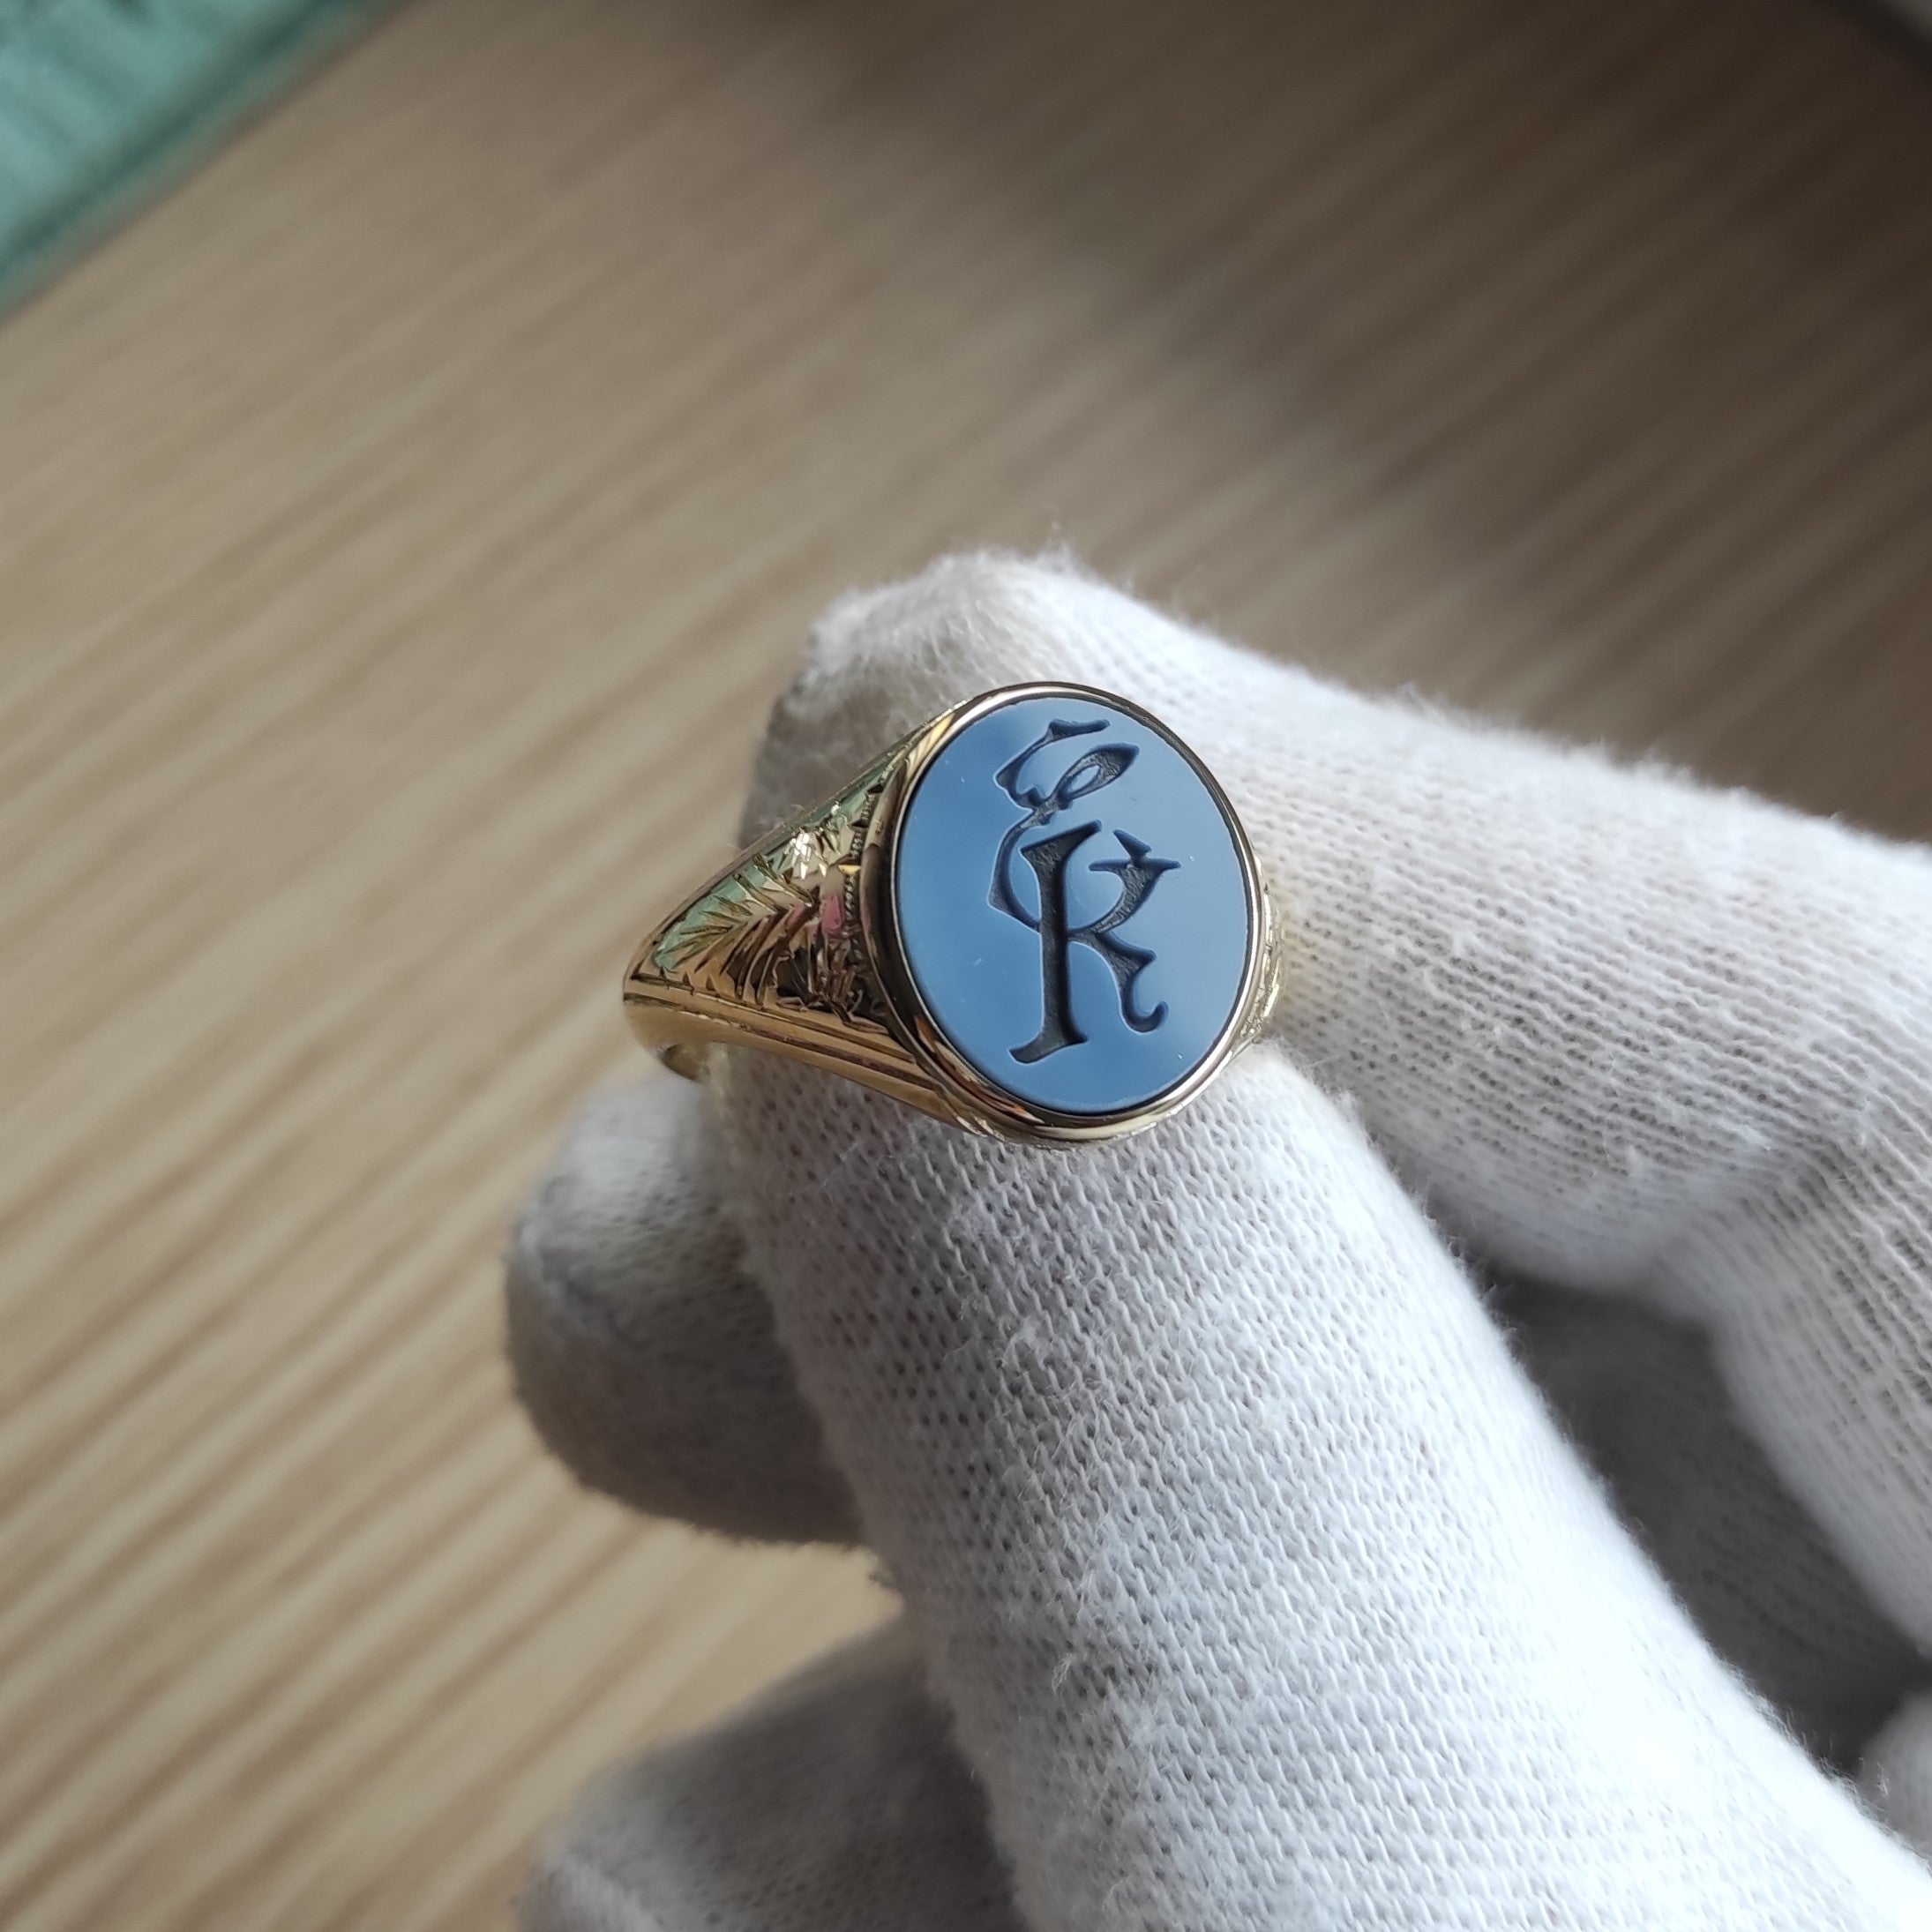 Best of Etsy: Vintage Signet Rings by M.S. Jewelers